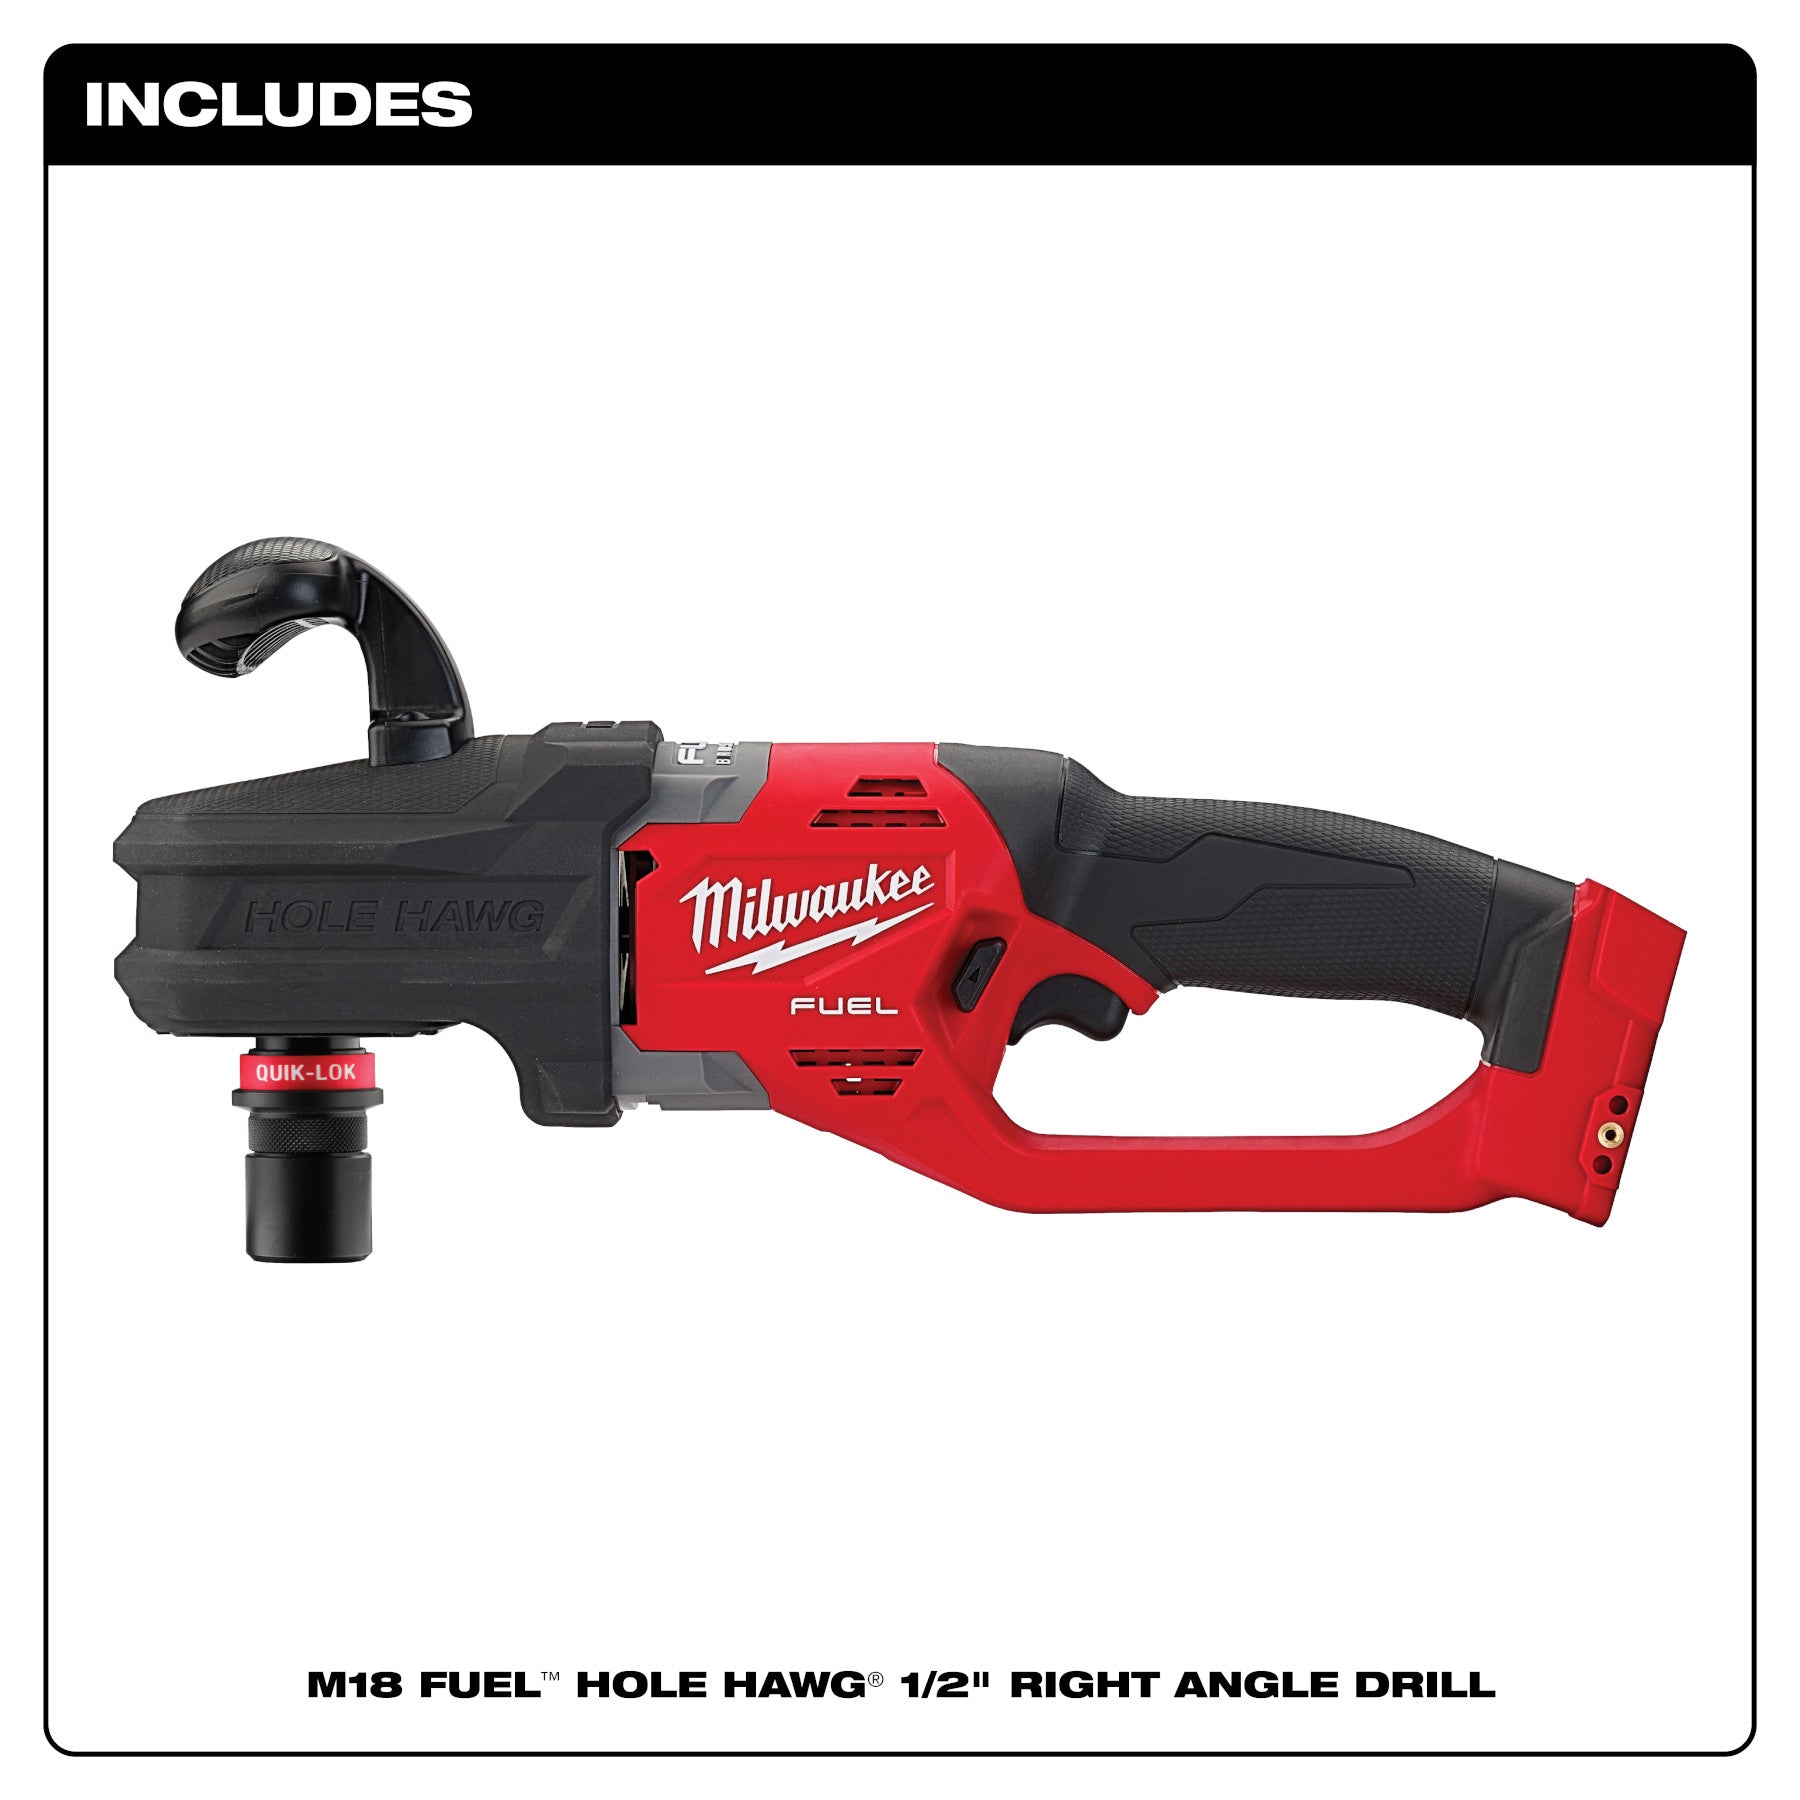 M18 FUEL™ HOLE HAWG® Right Angle Drill w/ QUIK-LOK™ Tool Only